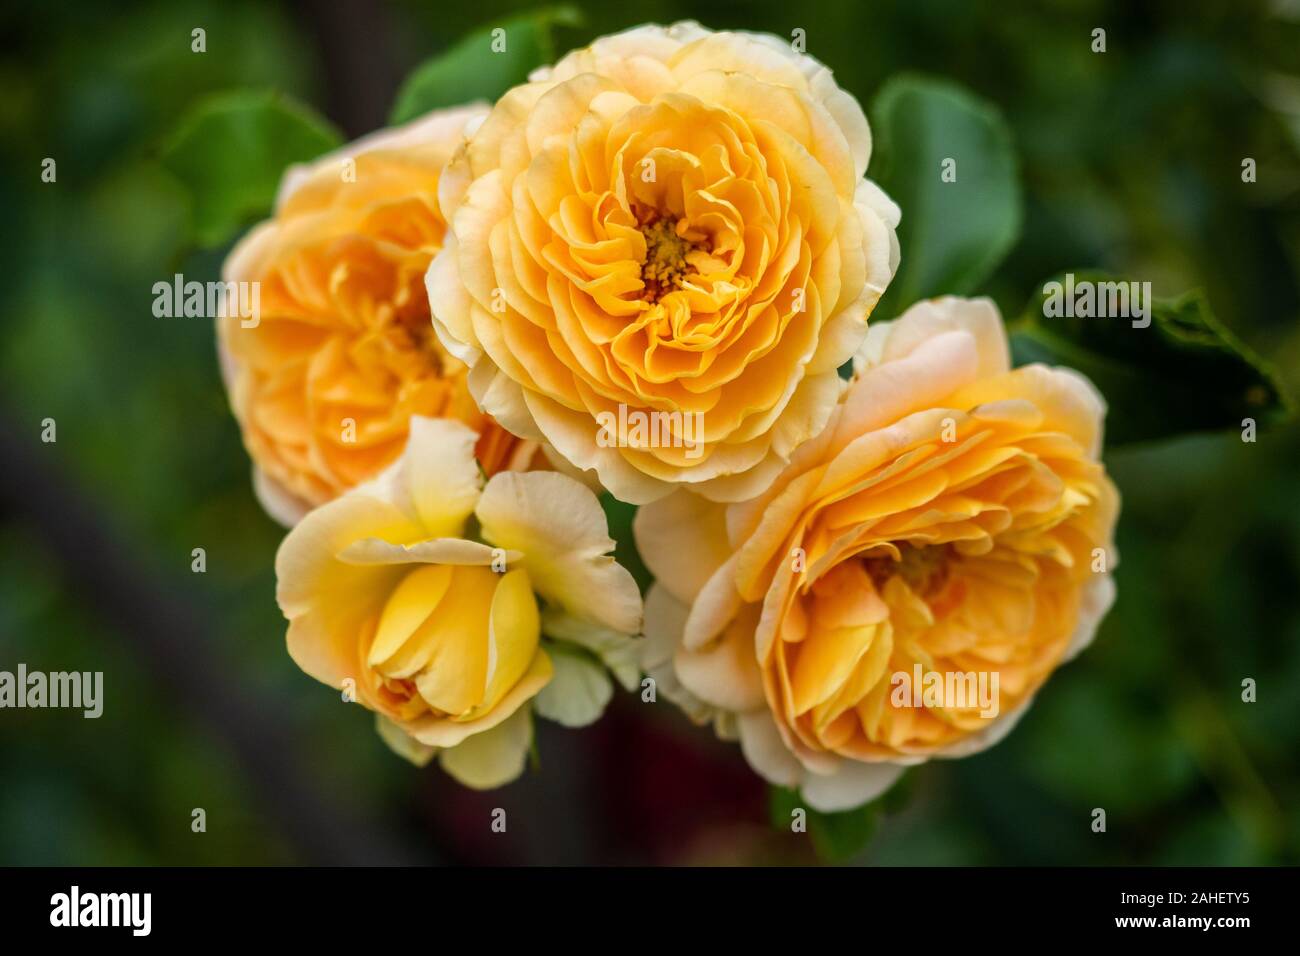 A bunch of orange roses with selective blur and green background taken in South Australia on 21st November 2019 Stock Photo